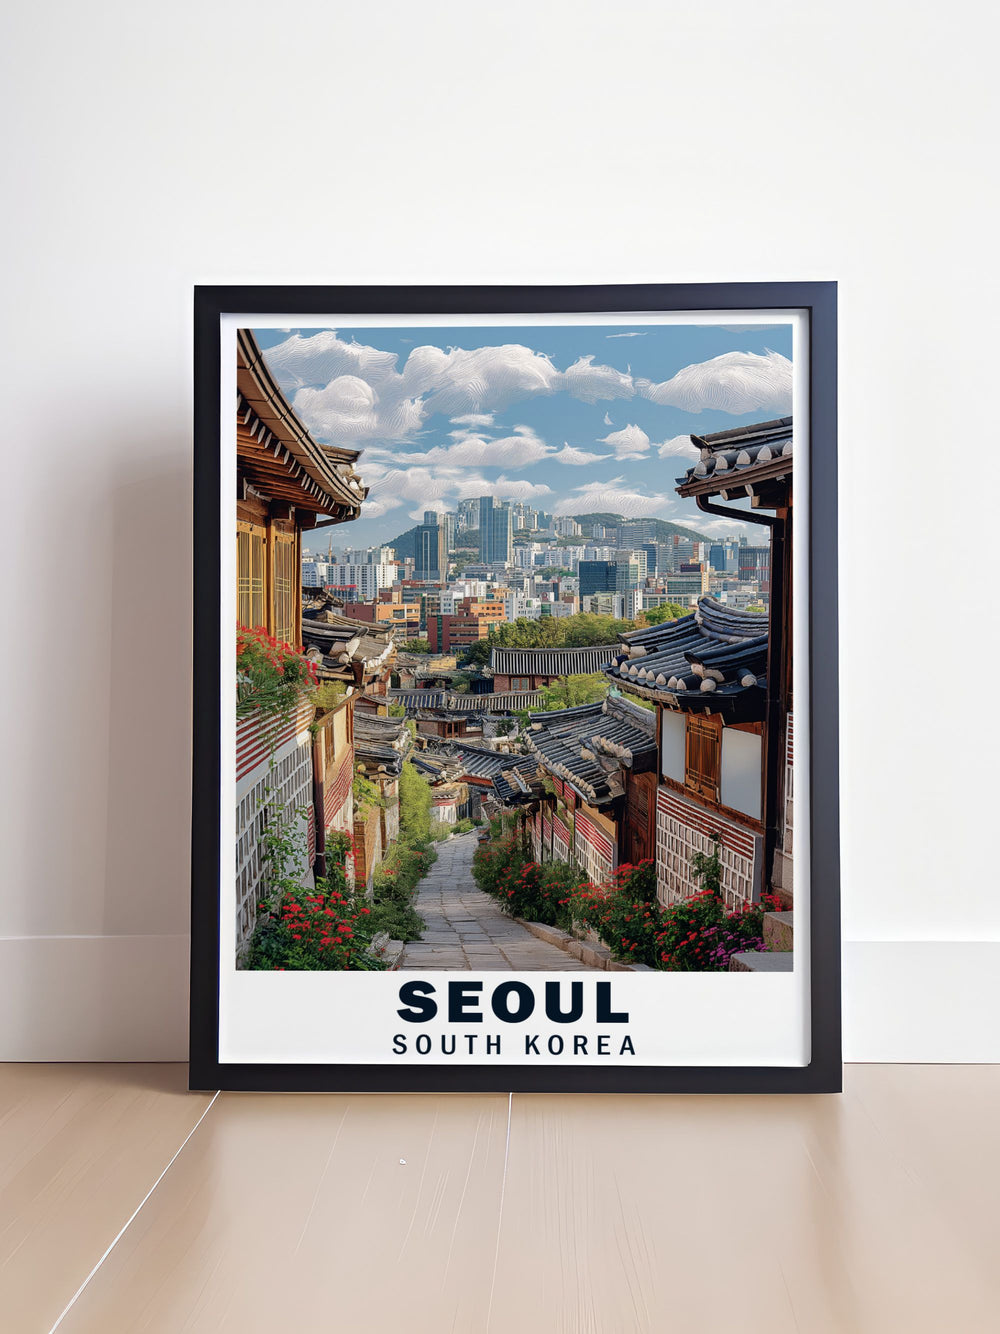 This poster of Seoul and Bukchon Hanok Village celebrates the unique blend of ancient traditions and modern innovations, highlighting the rich cultural heritage and dynamic cityscape of South Koreas capital.